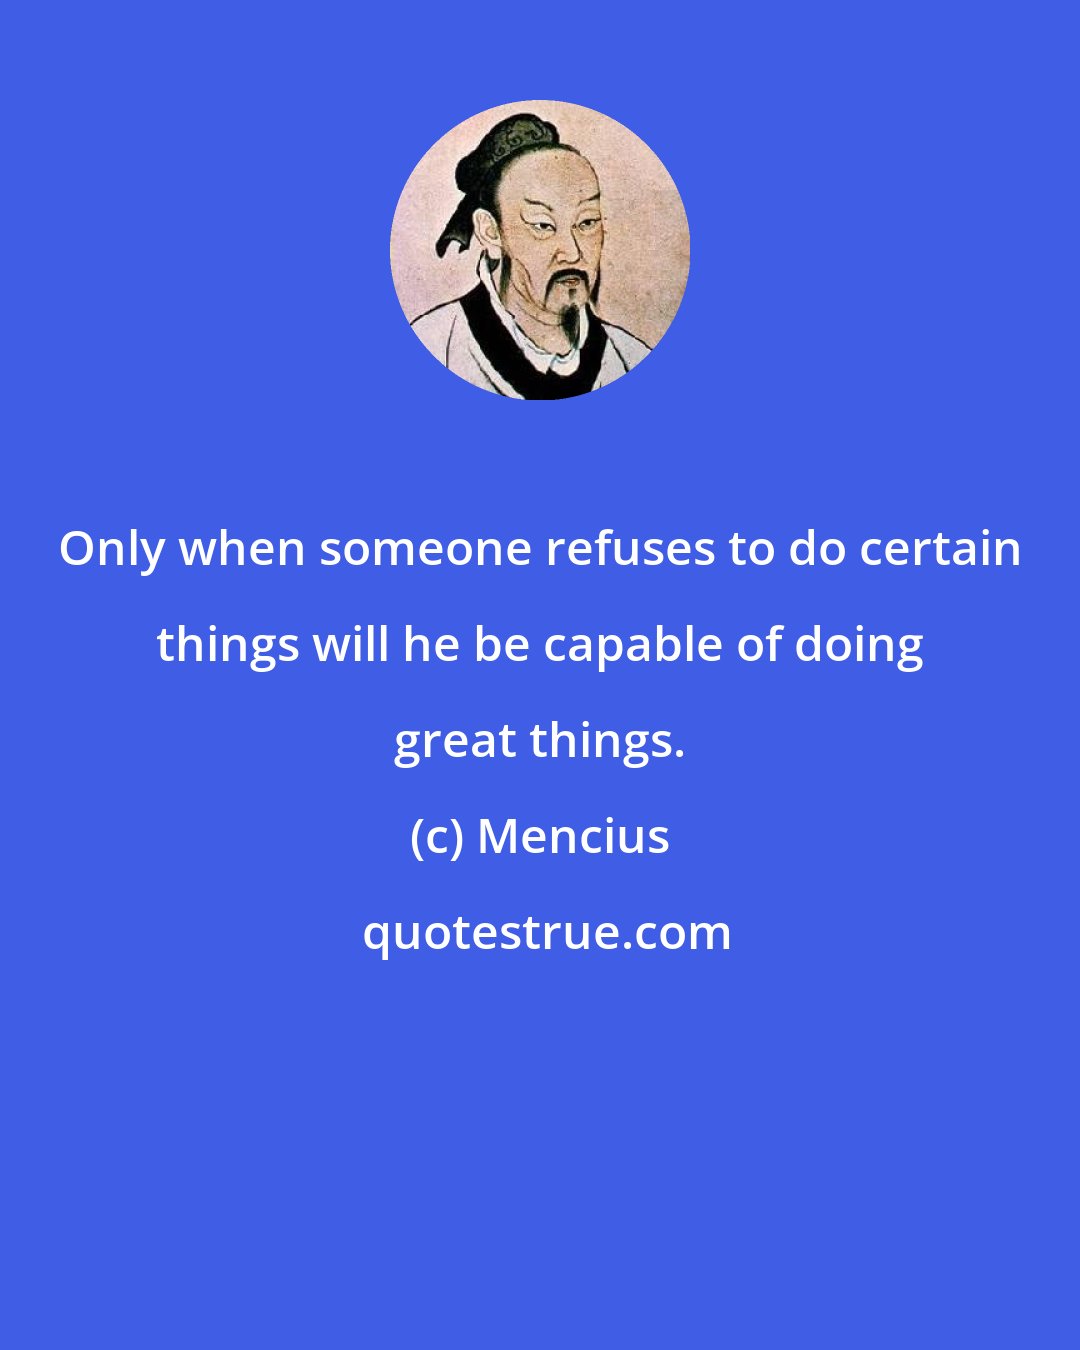 Mencius: Only when someone refuses to do certain things will he be capable of doing great things.